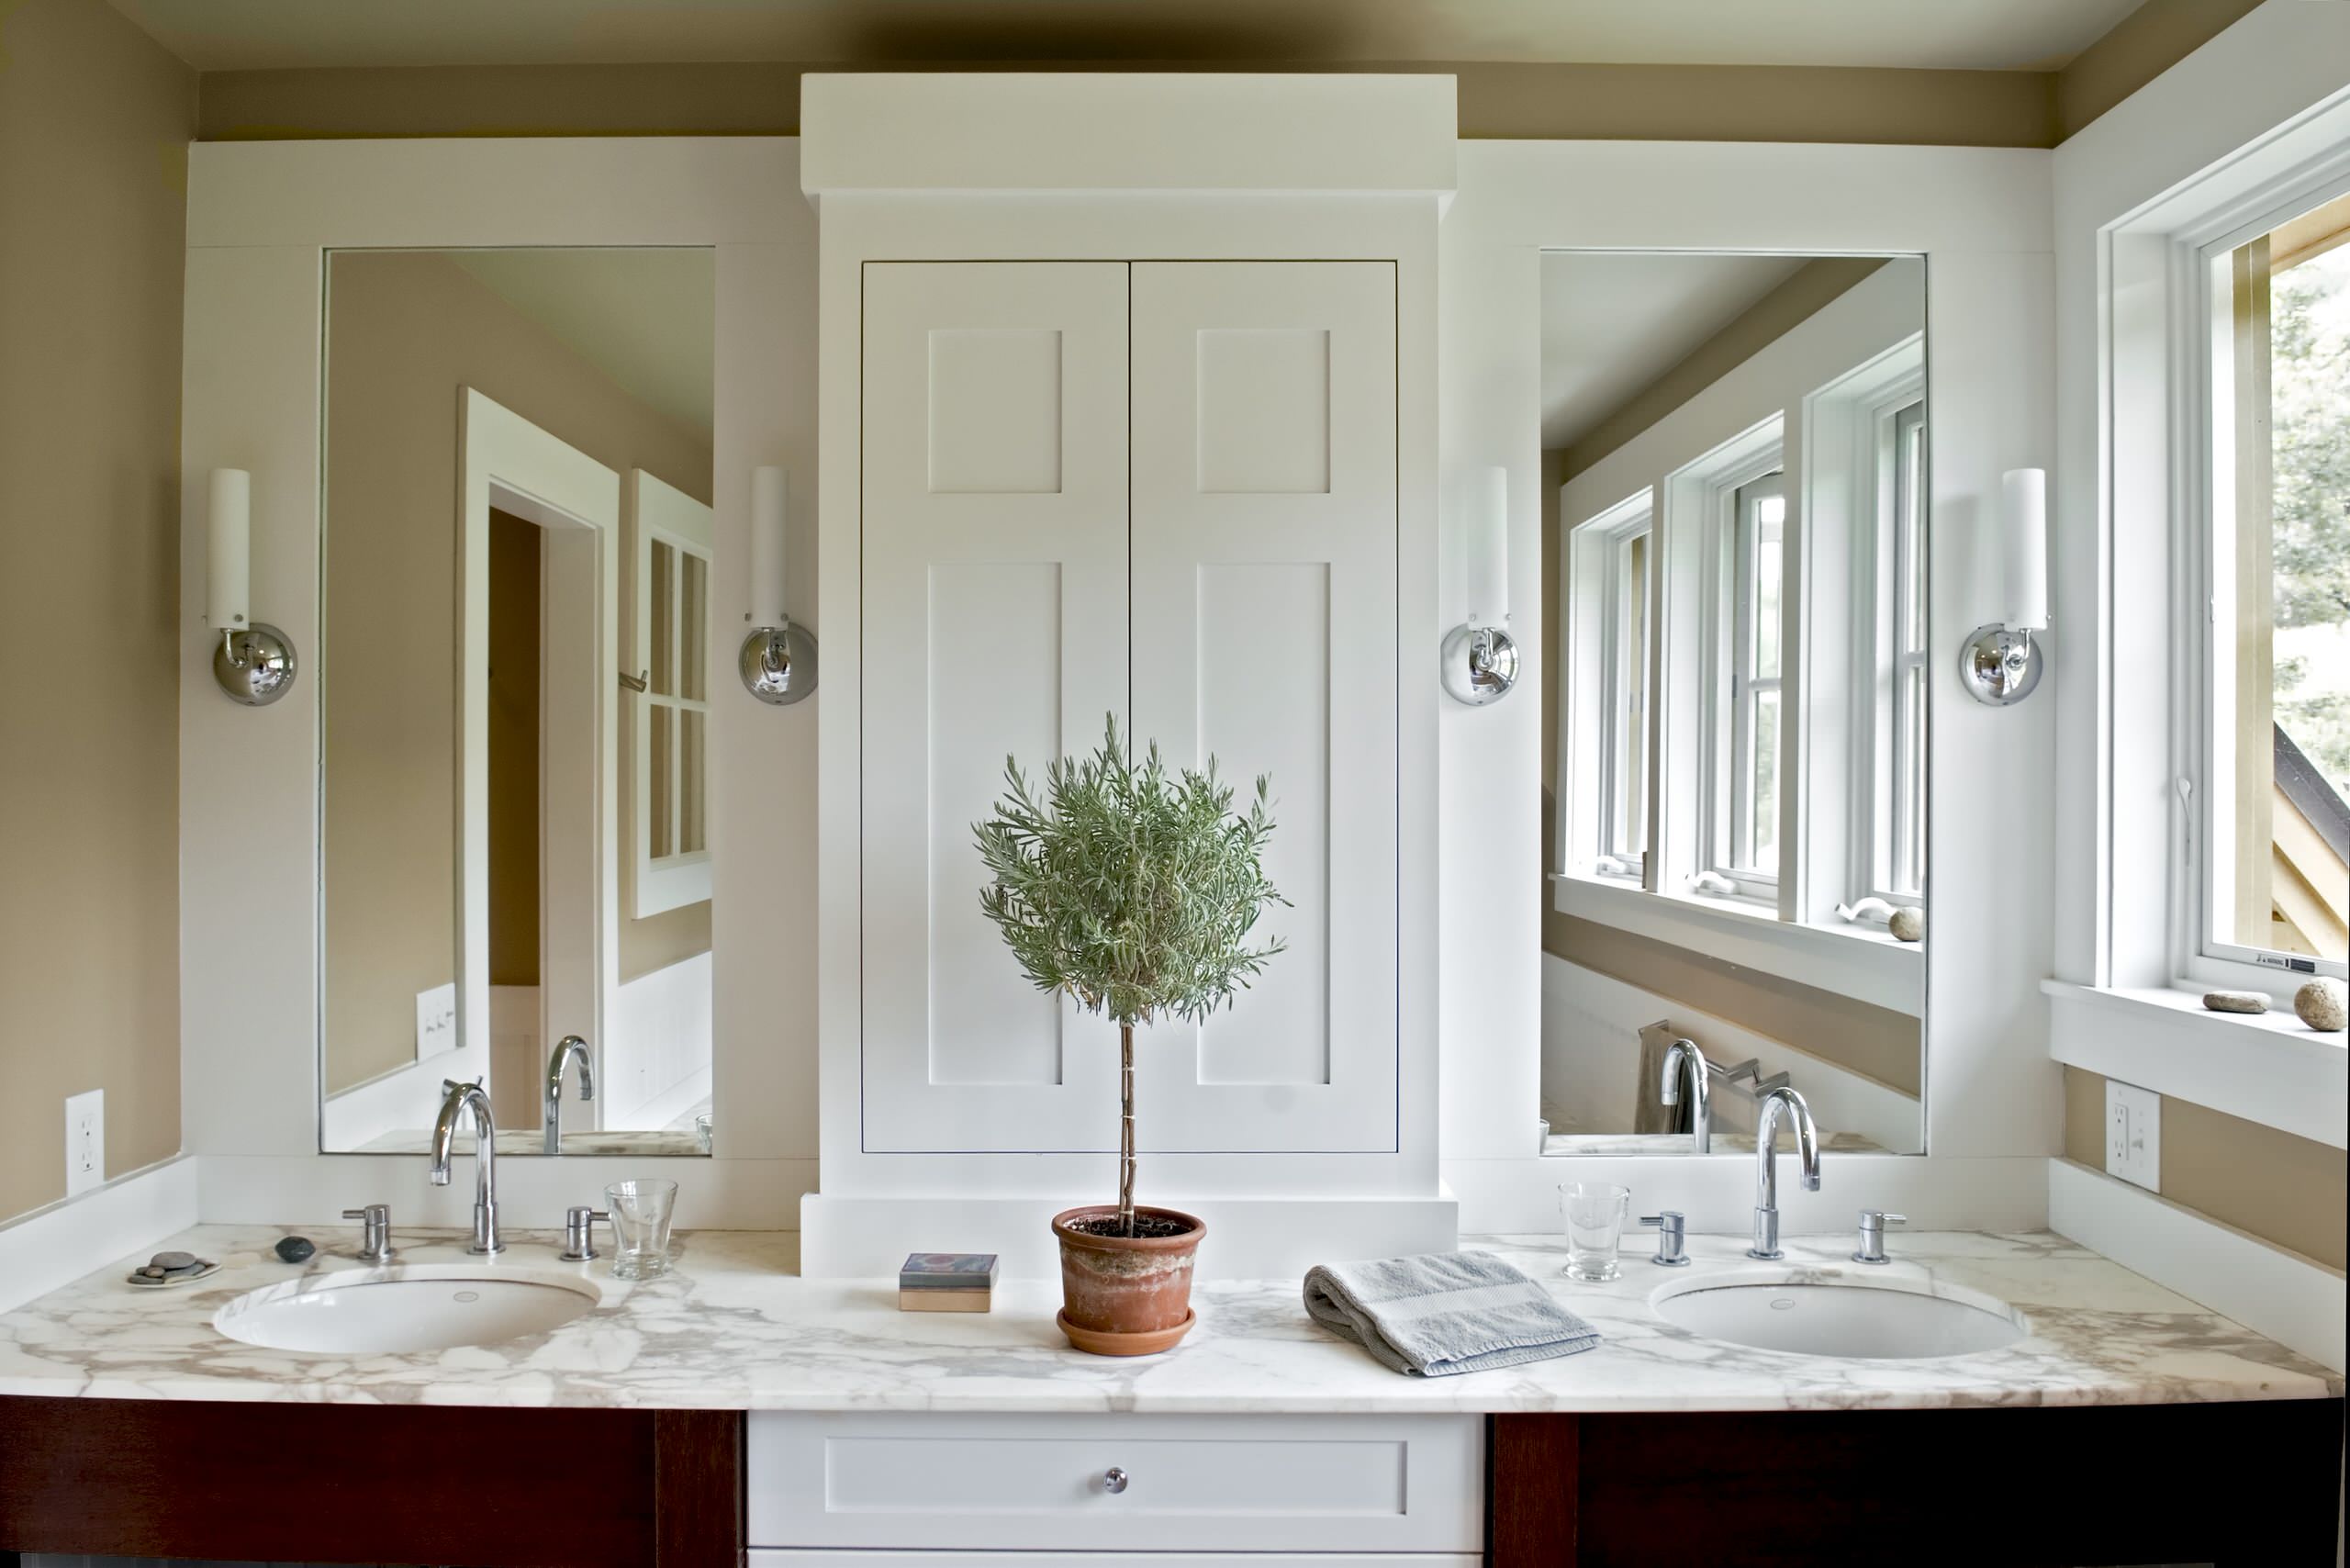 Double Vanity Towers Houzz, Bathroom Double Sinks With Tower Storage